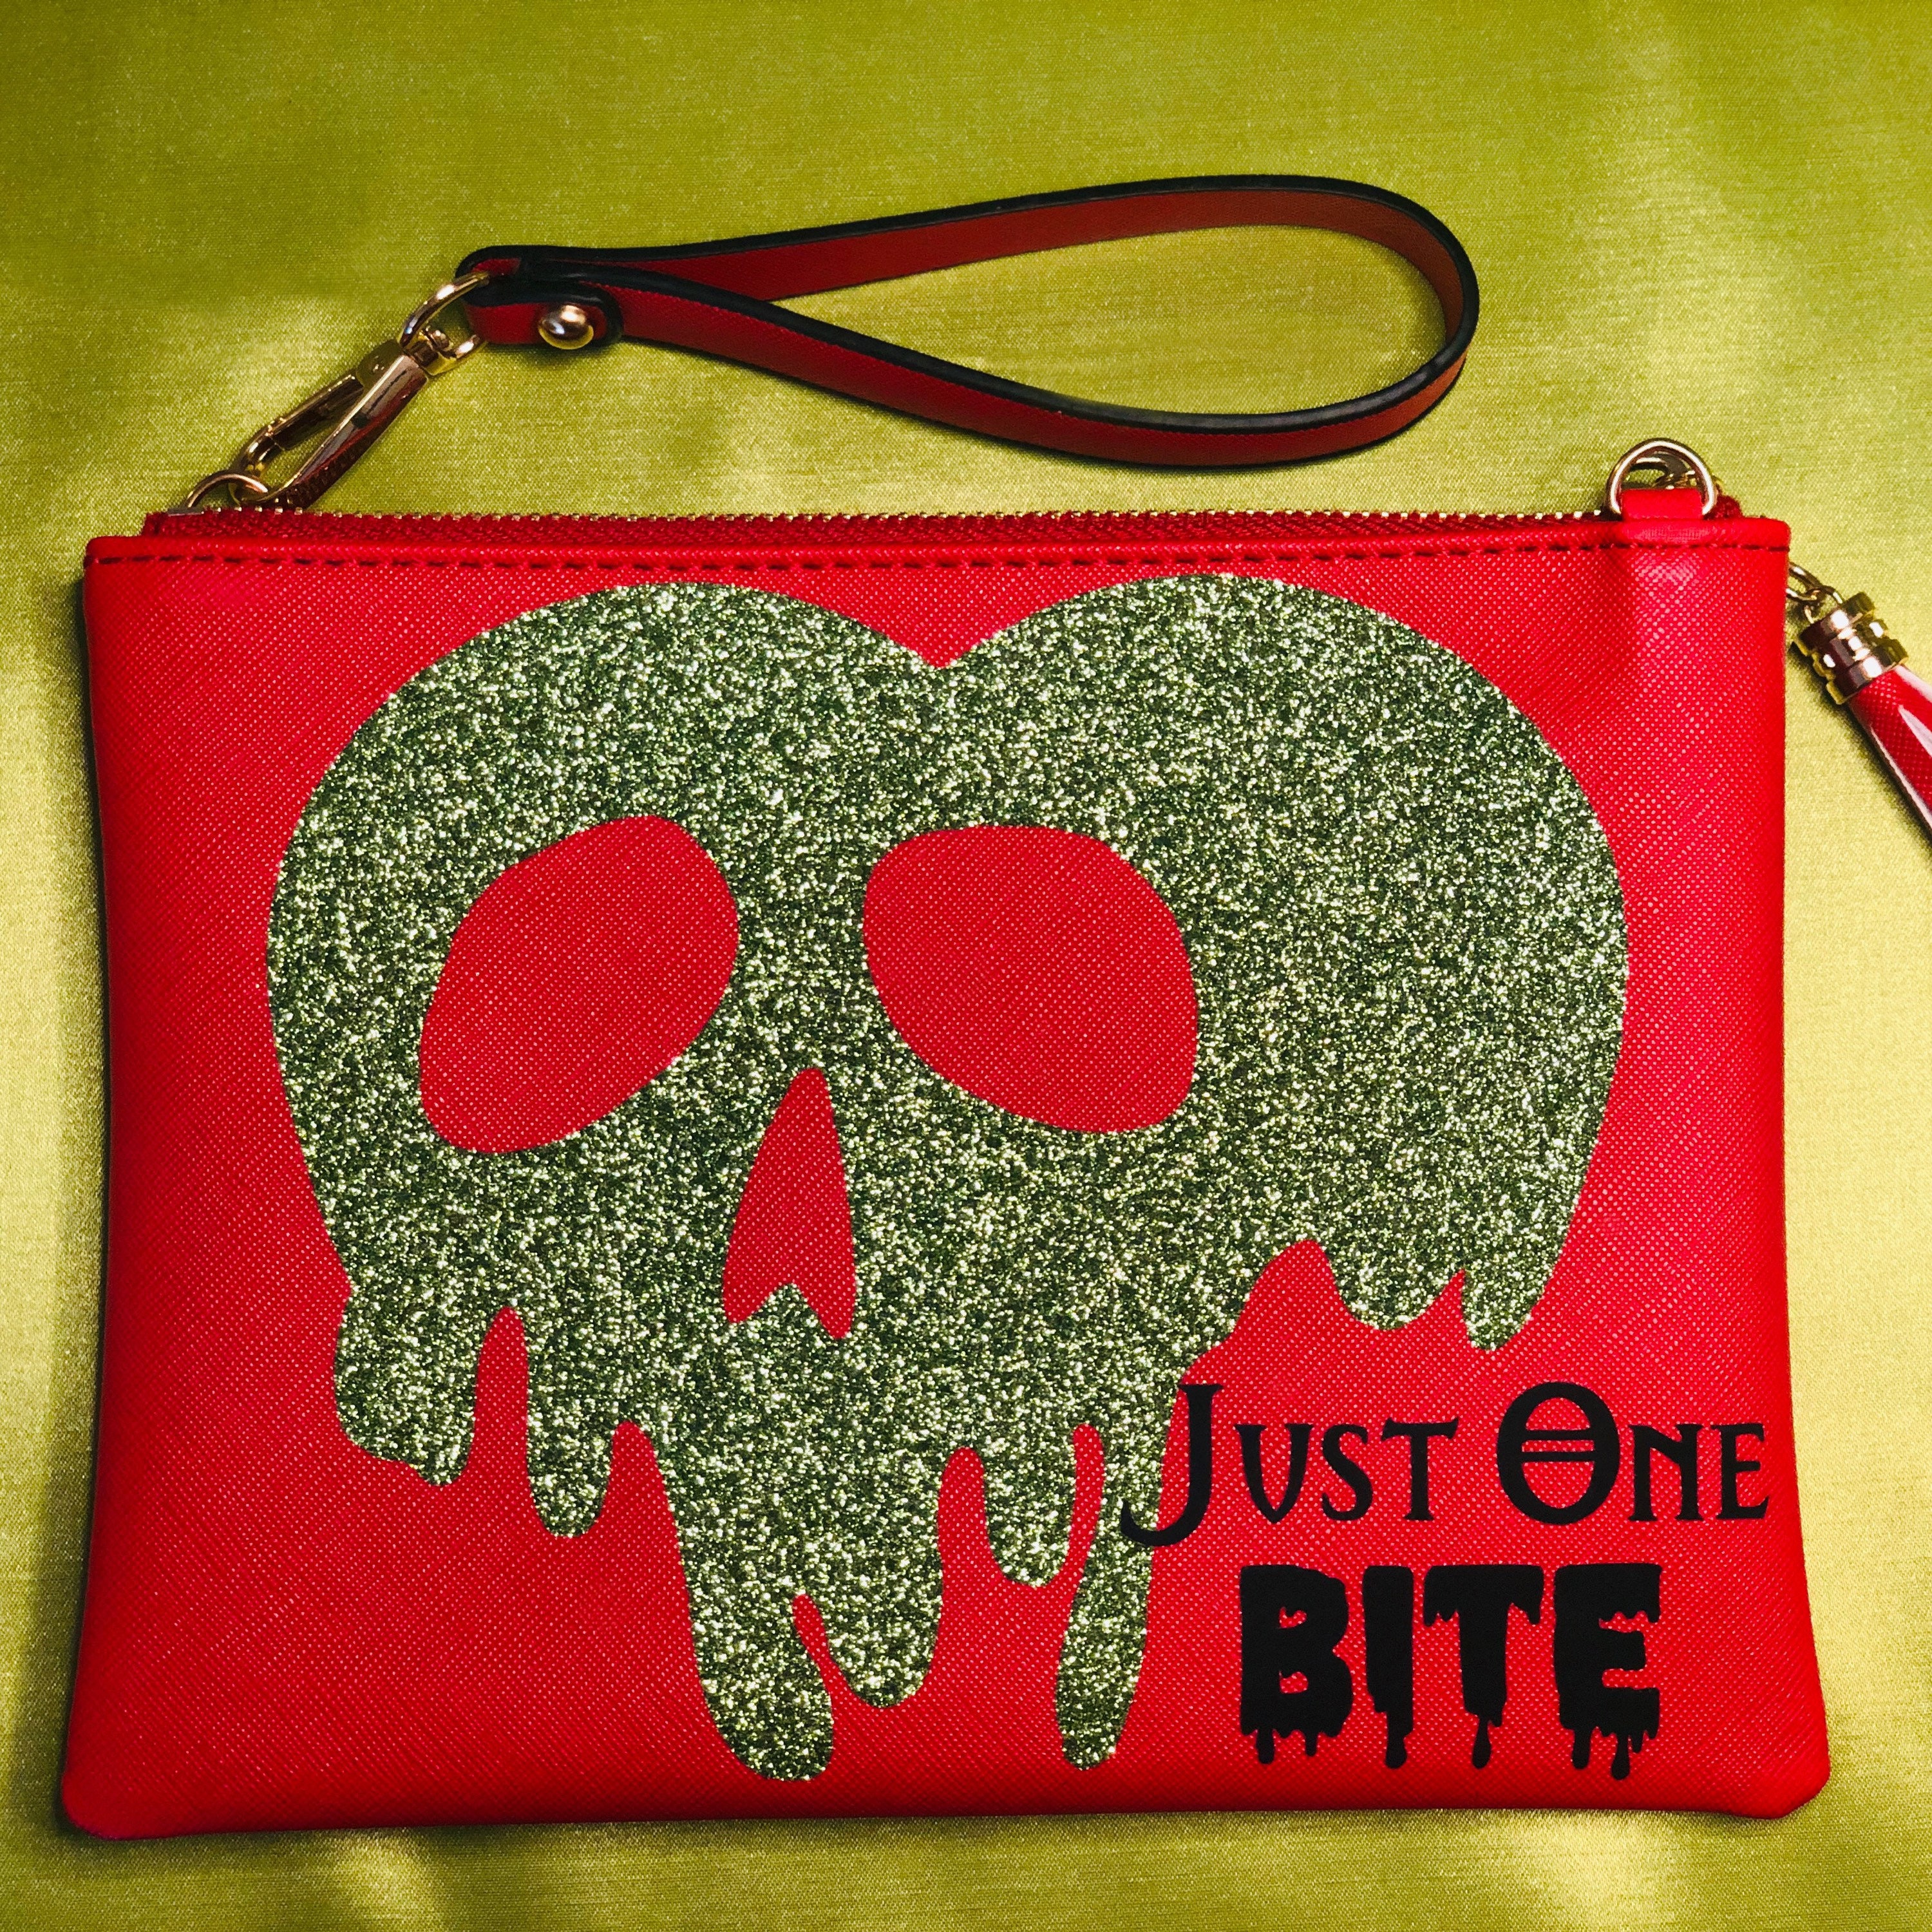 Poison Apple Cross Body and Clutch Purse